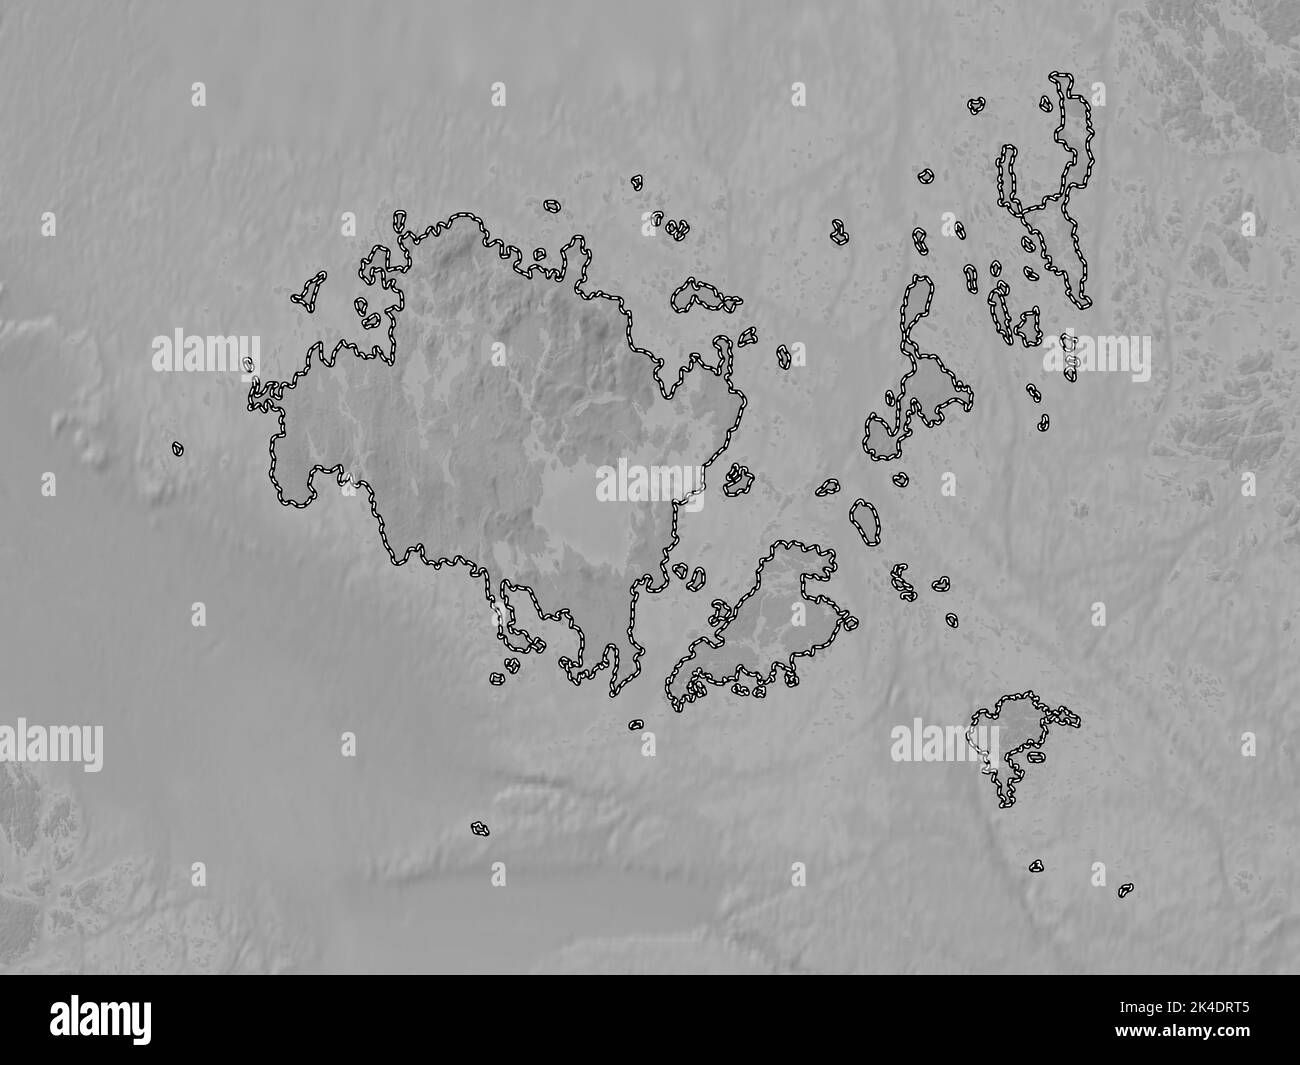 Aland, region of Finland. Grayscale elevation map with lakes and rivers Stock Photo